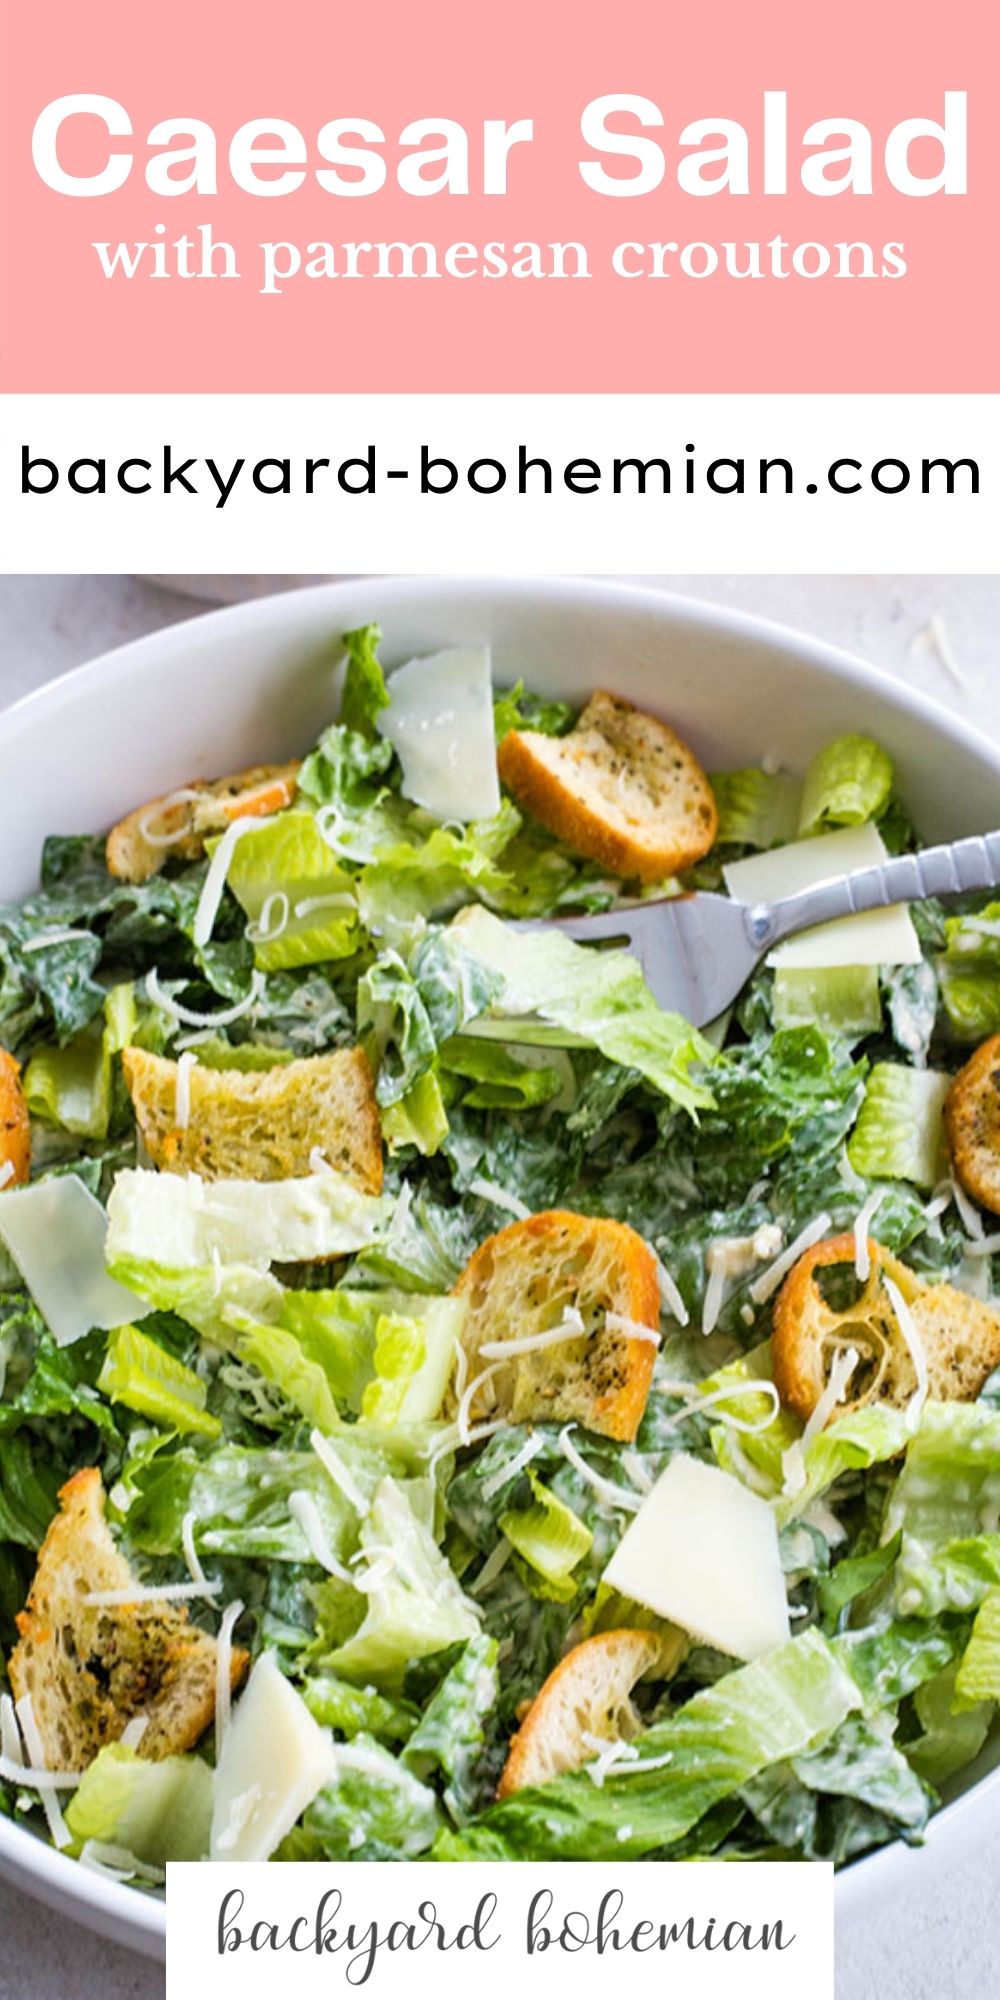 This easy to make Caesar salad is rich, tangy, and so easy to put together! The homemade parmesan herb croutons really kicks this salad up a notch! via @foodhussy